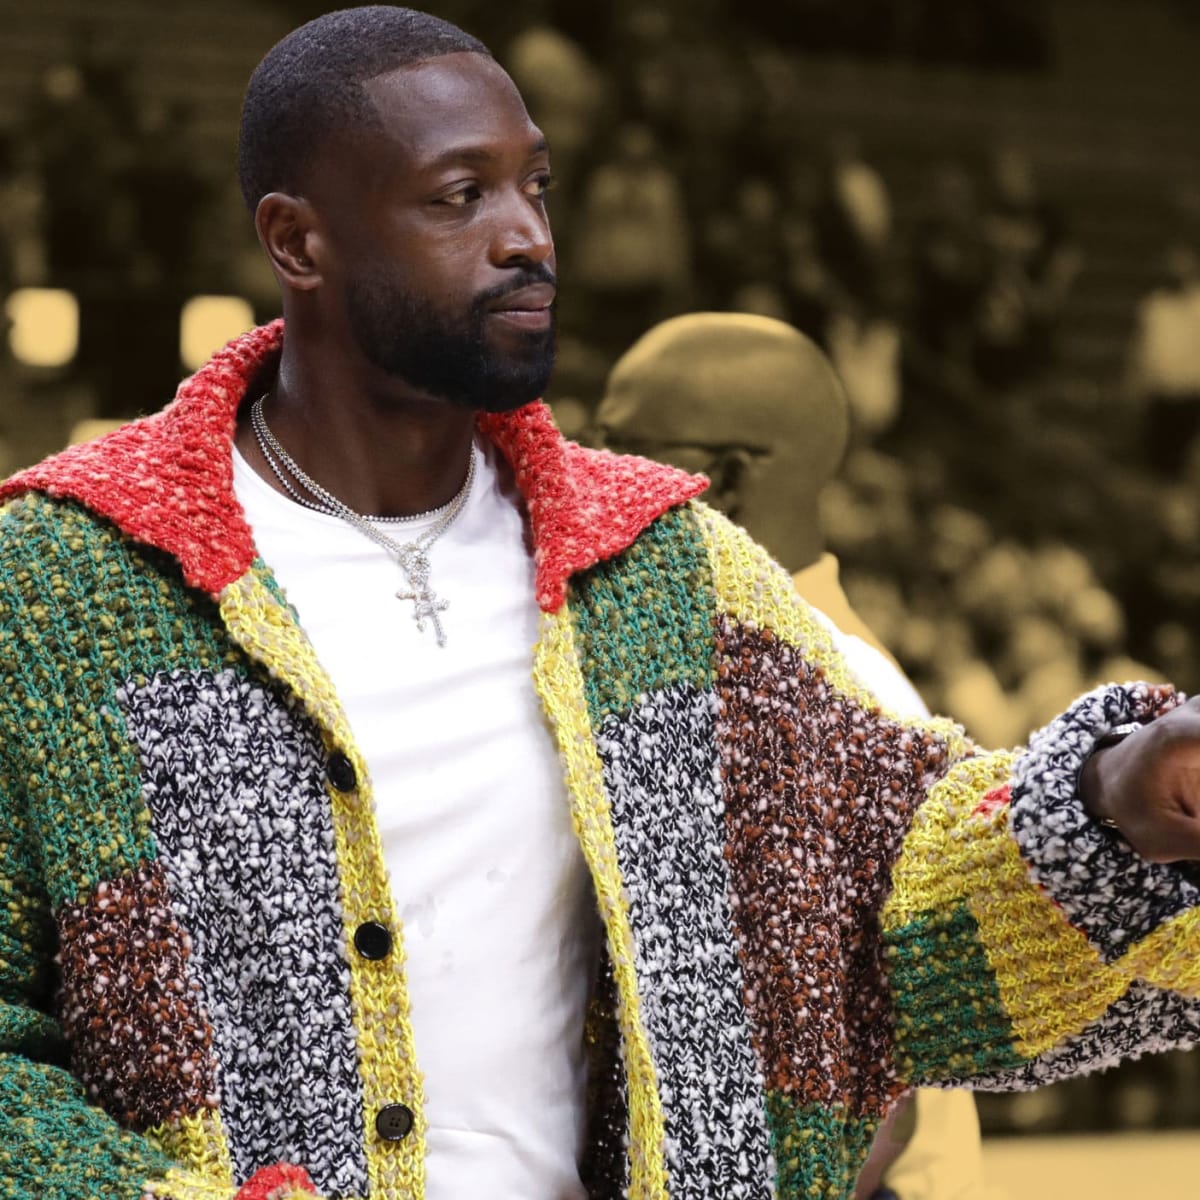 Dwyane Wade's 5 Most Stylish Looks (On & Off The Court)